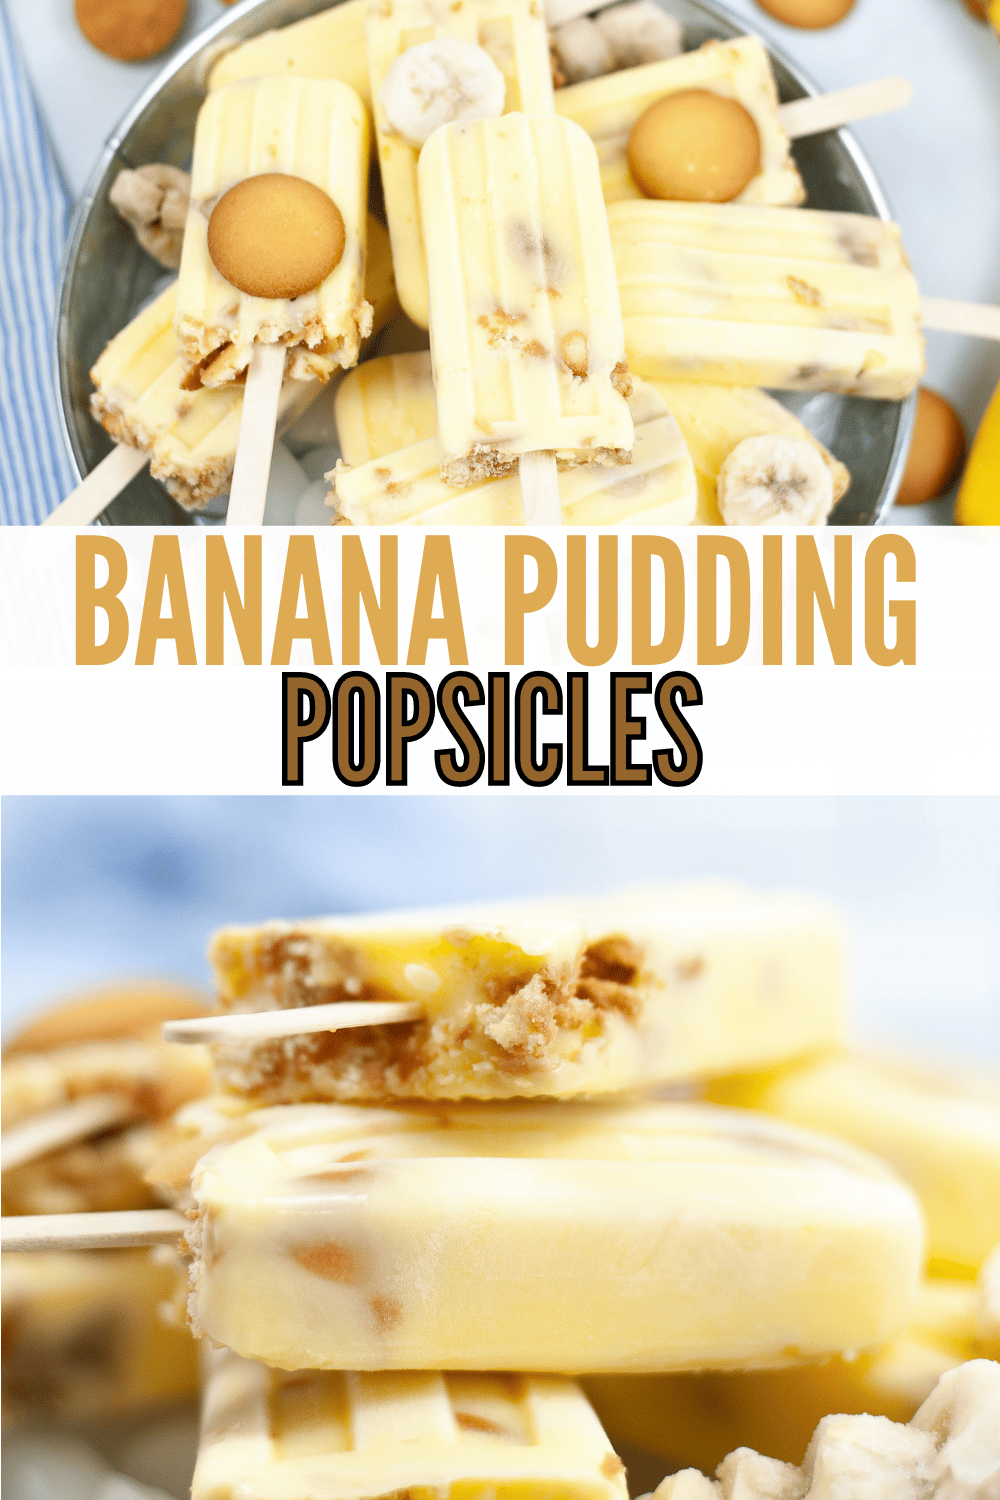 These Banana Pudding Popsicles are my new favorite summer dessert! They are so easy to make, and they taste just like banana pudding. #bananapuddingpopsicles #bananapudding #popsicles #summerdessert via @wondermomwannab